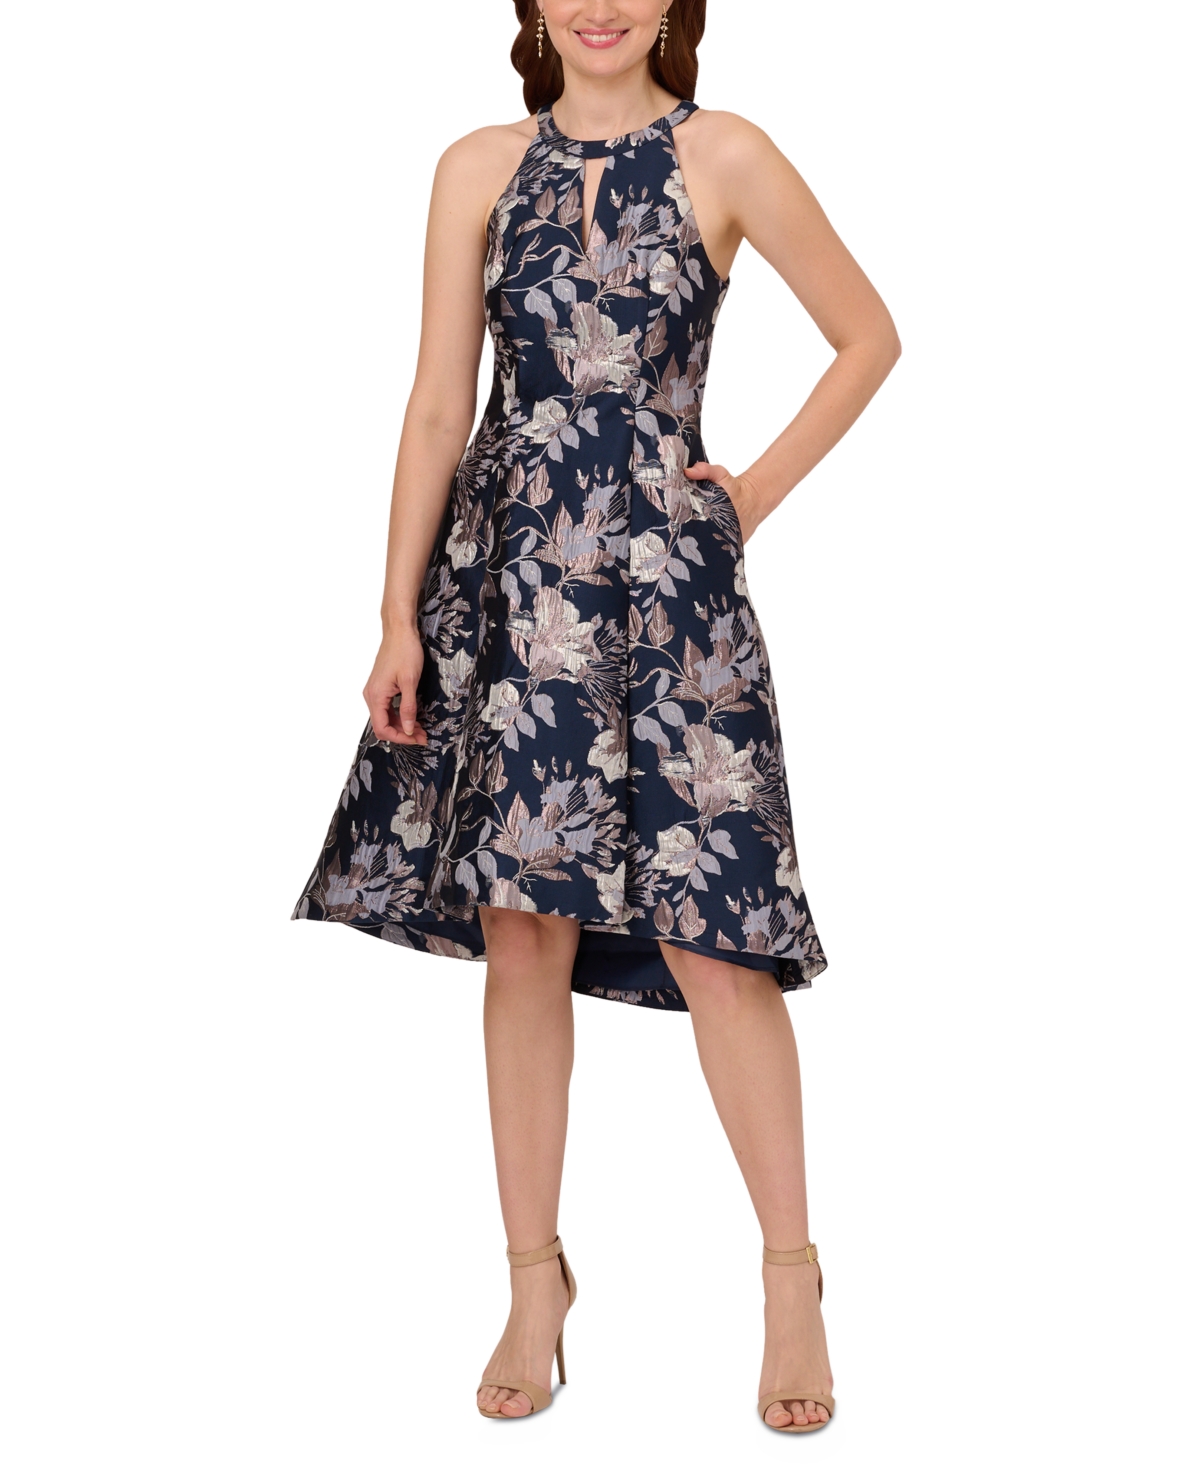 ADRIANNA PAPELL WOMEN'S FLORAL JACQUARD HIGH-LOW HALTER DRESS